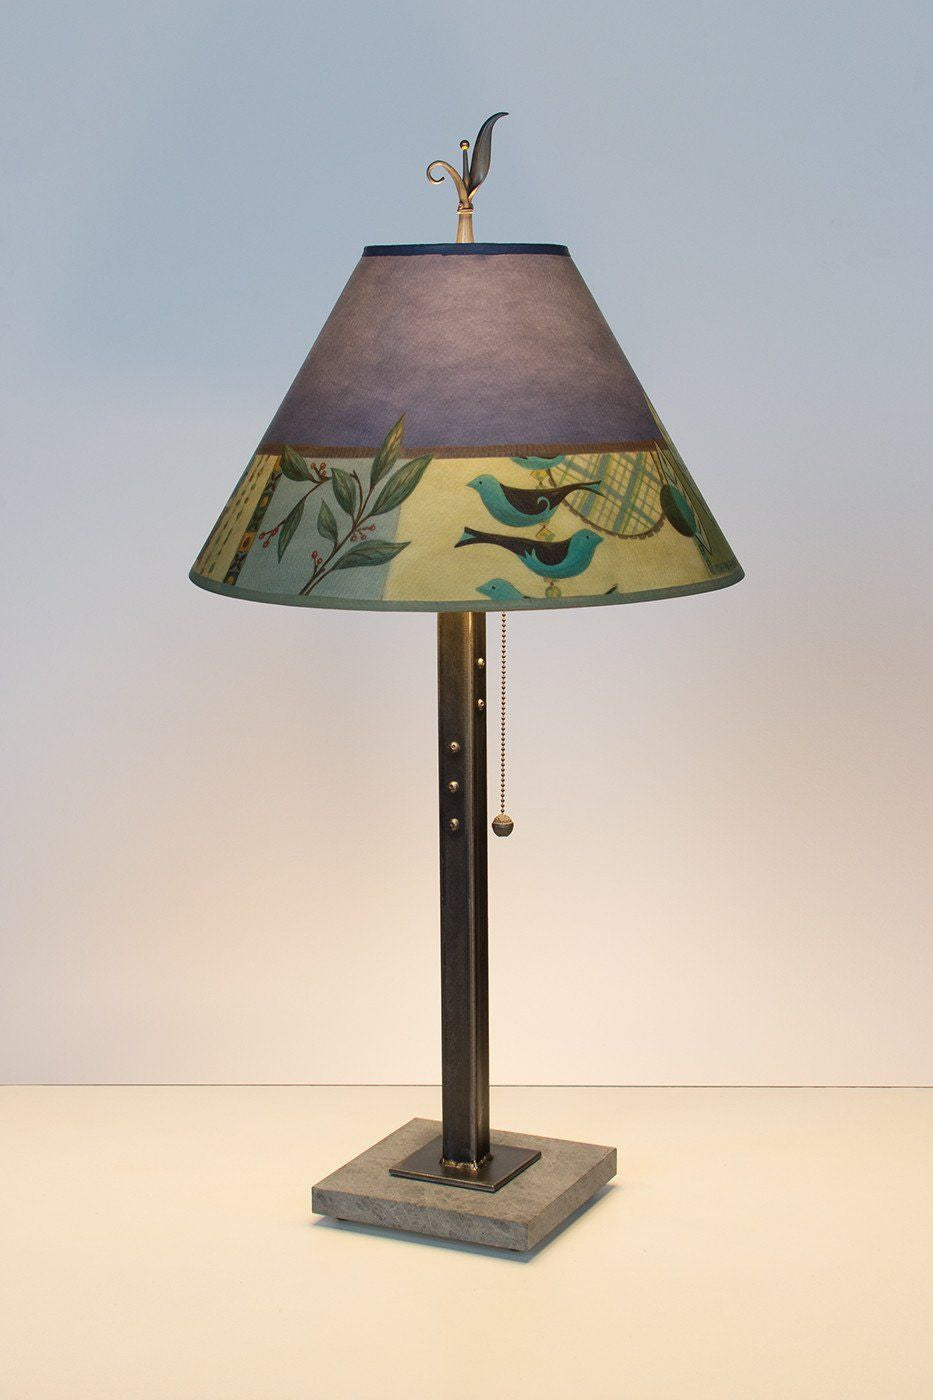 Janna Ugone & Co Table Lamps Steel Table Lamp with Medium Conical Shade in New Capri Periwinkle